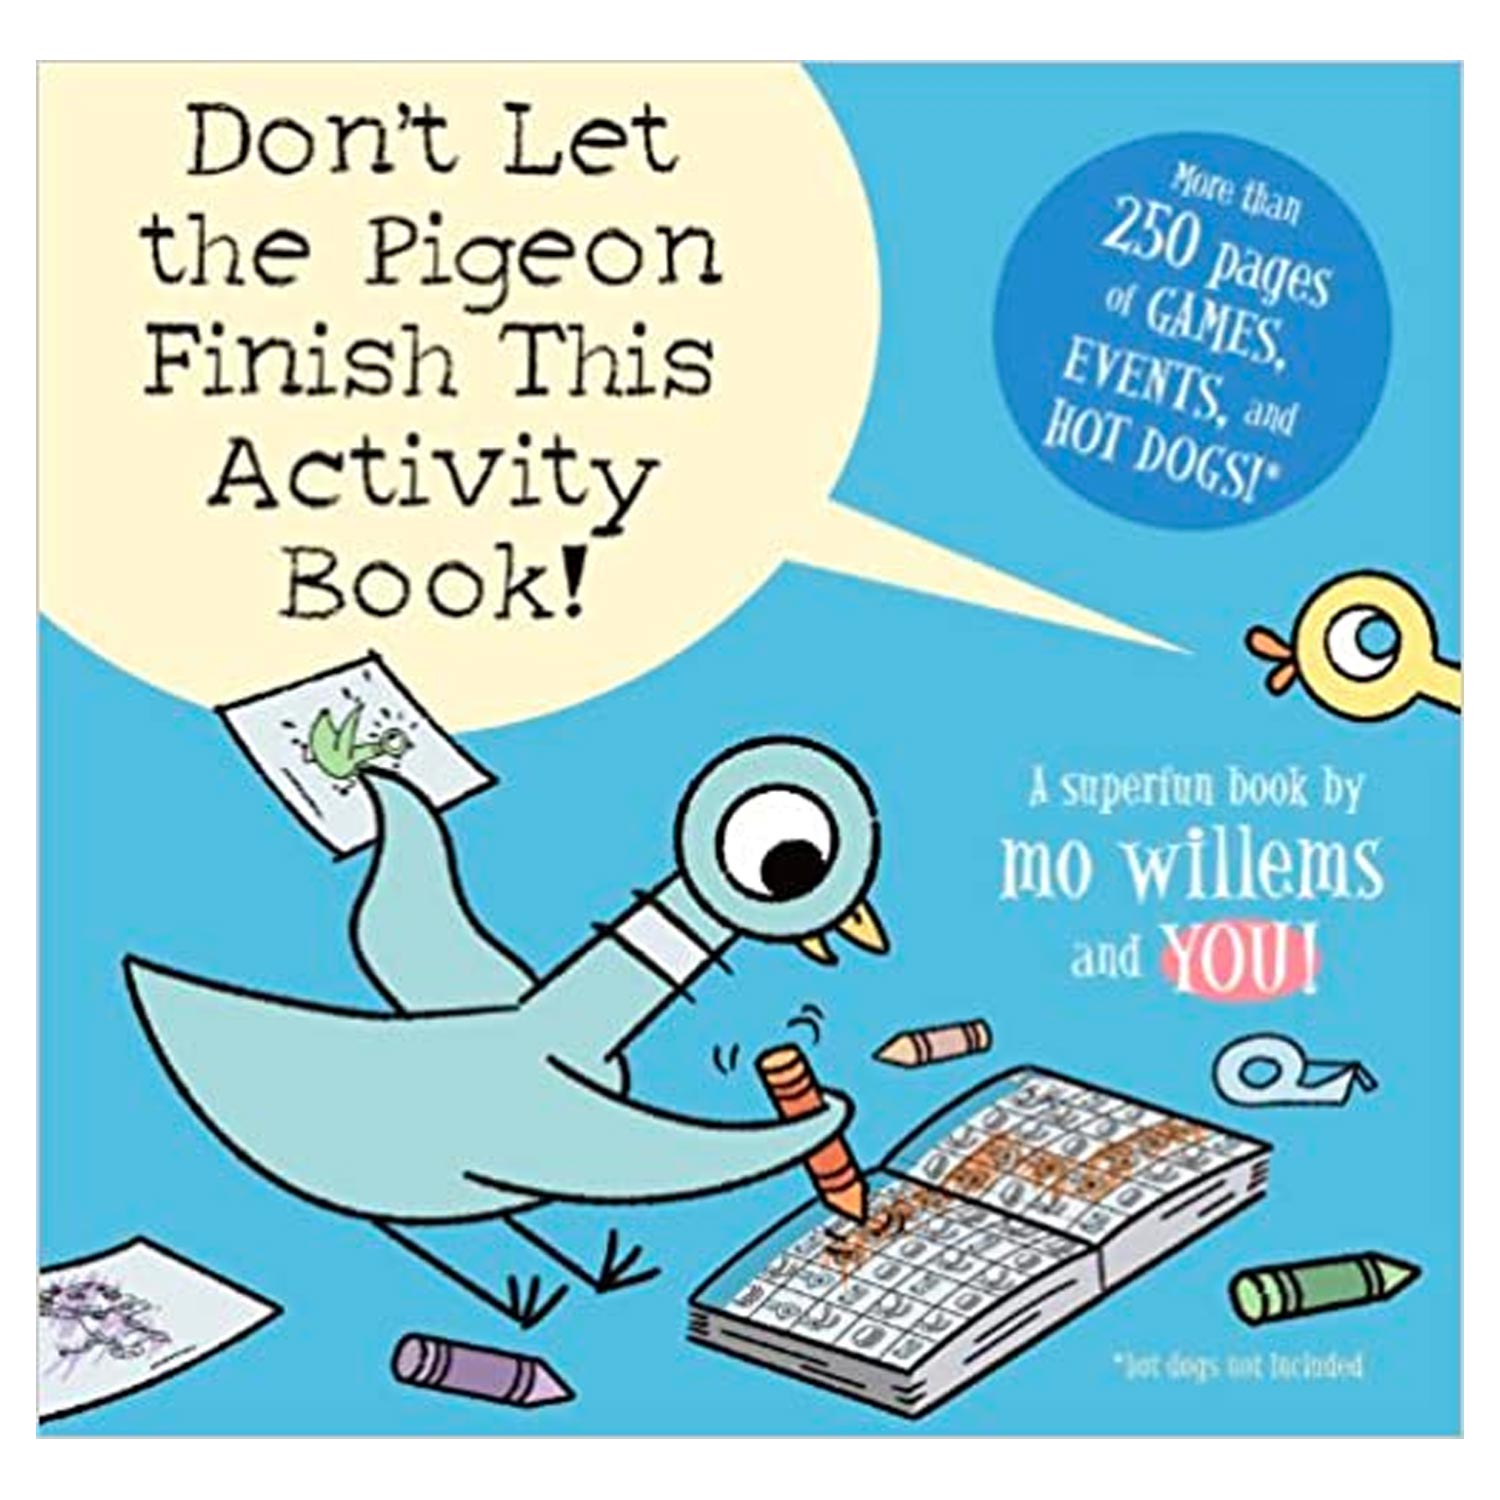 Don’t Let the Pigeon Finish This Activity Book!